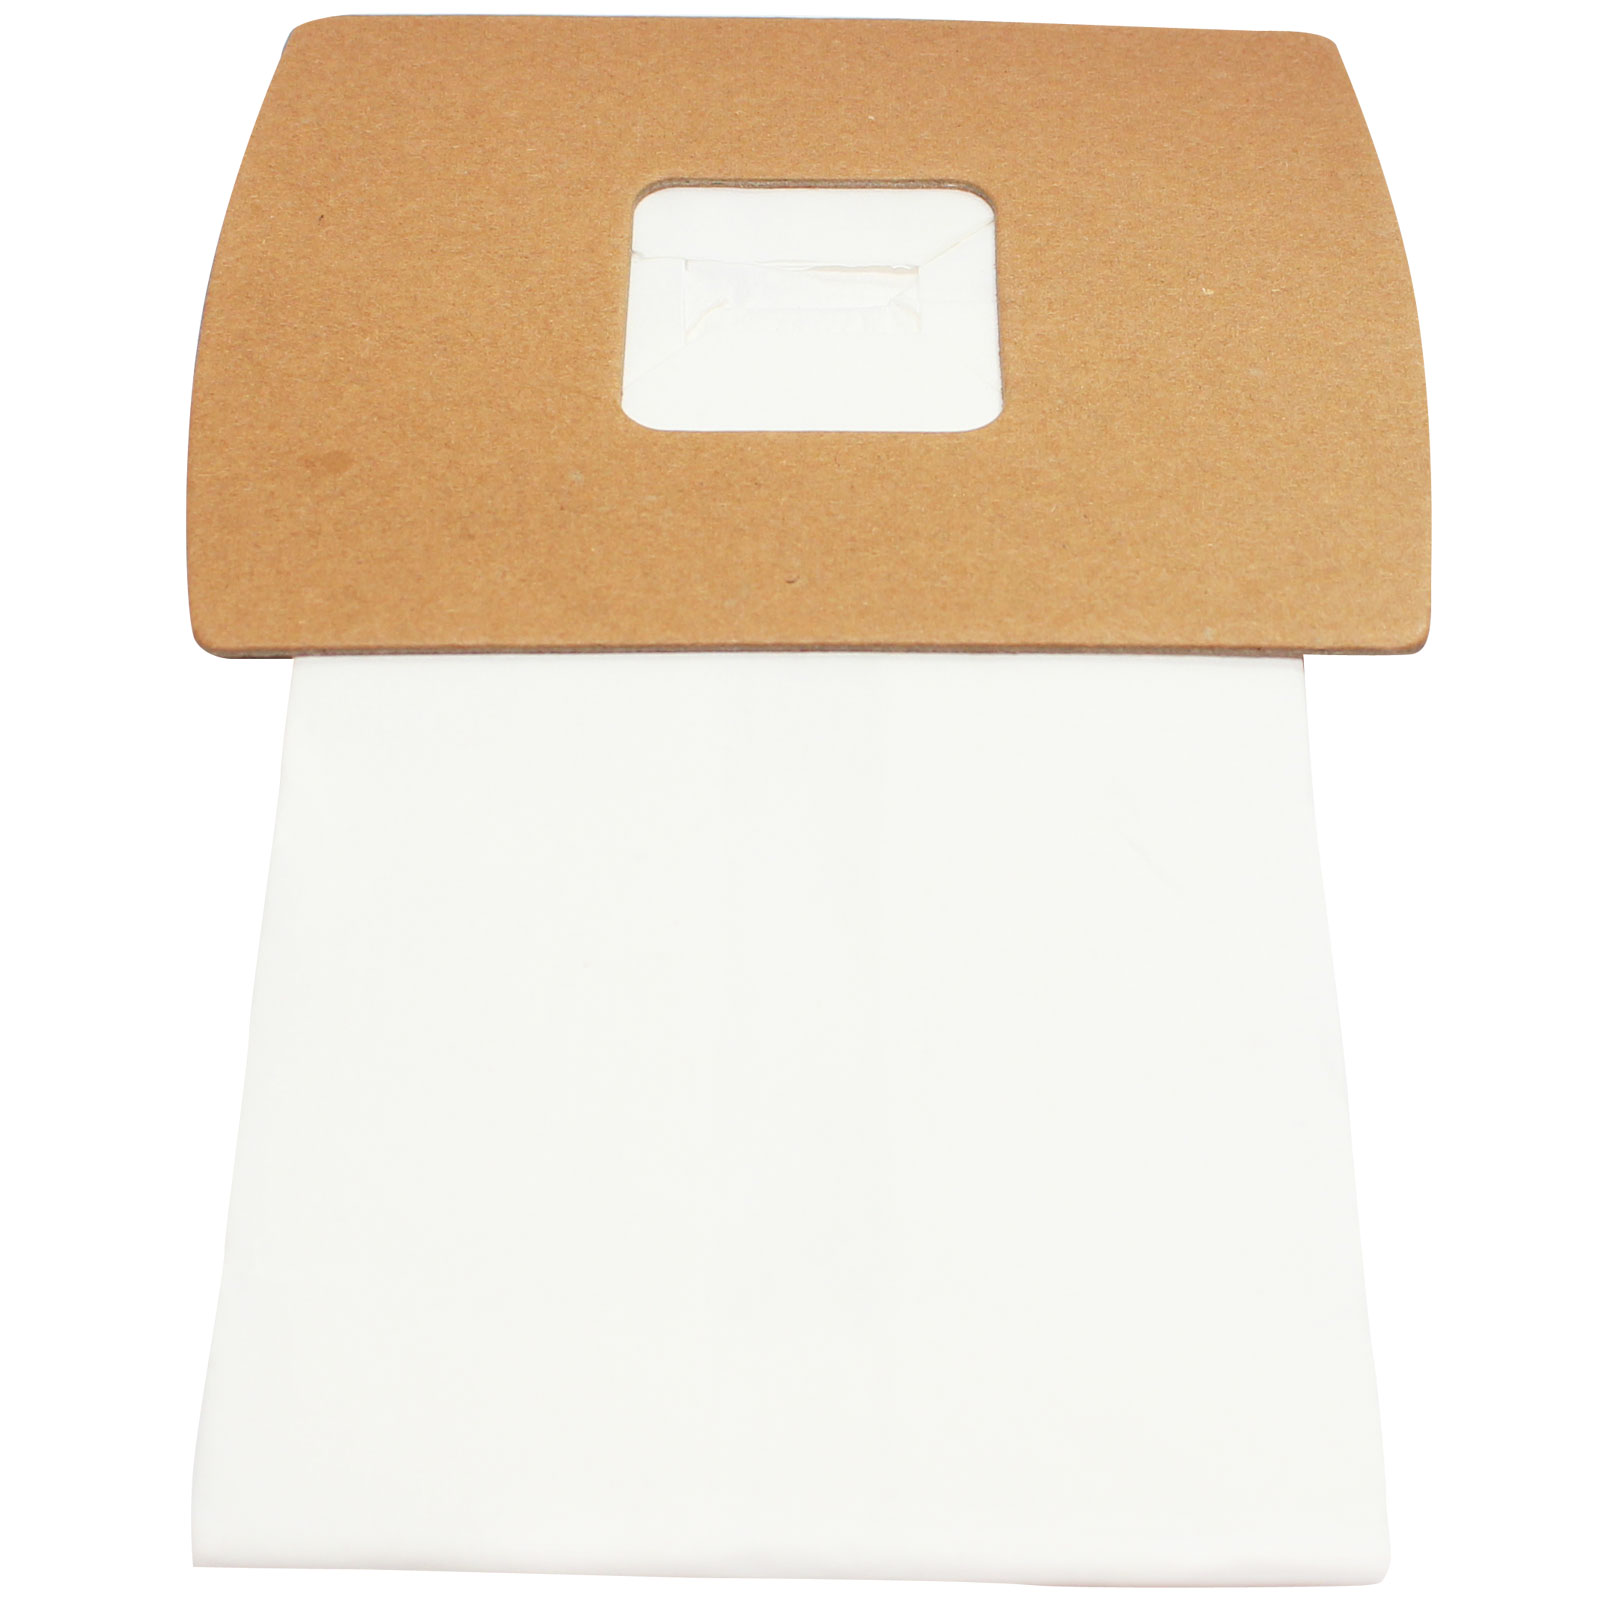 UpStart Components 3 Oreck BB-850-AW Vacuum Bags  - For Oreck PKBB12DW, Type BB, Buster B Vacuum Bags